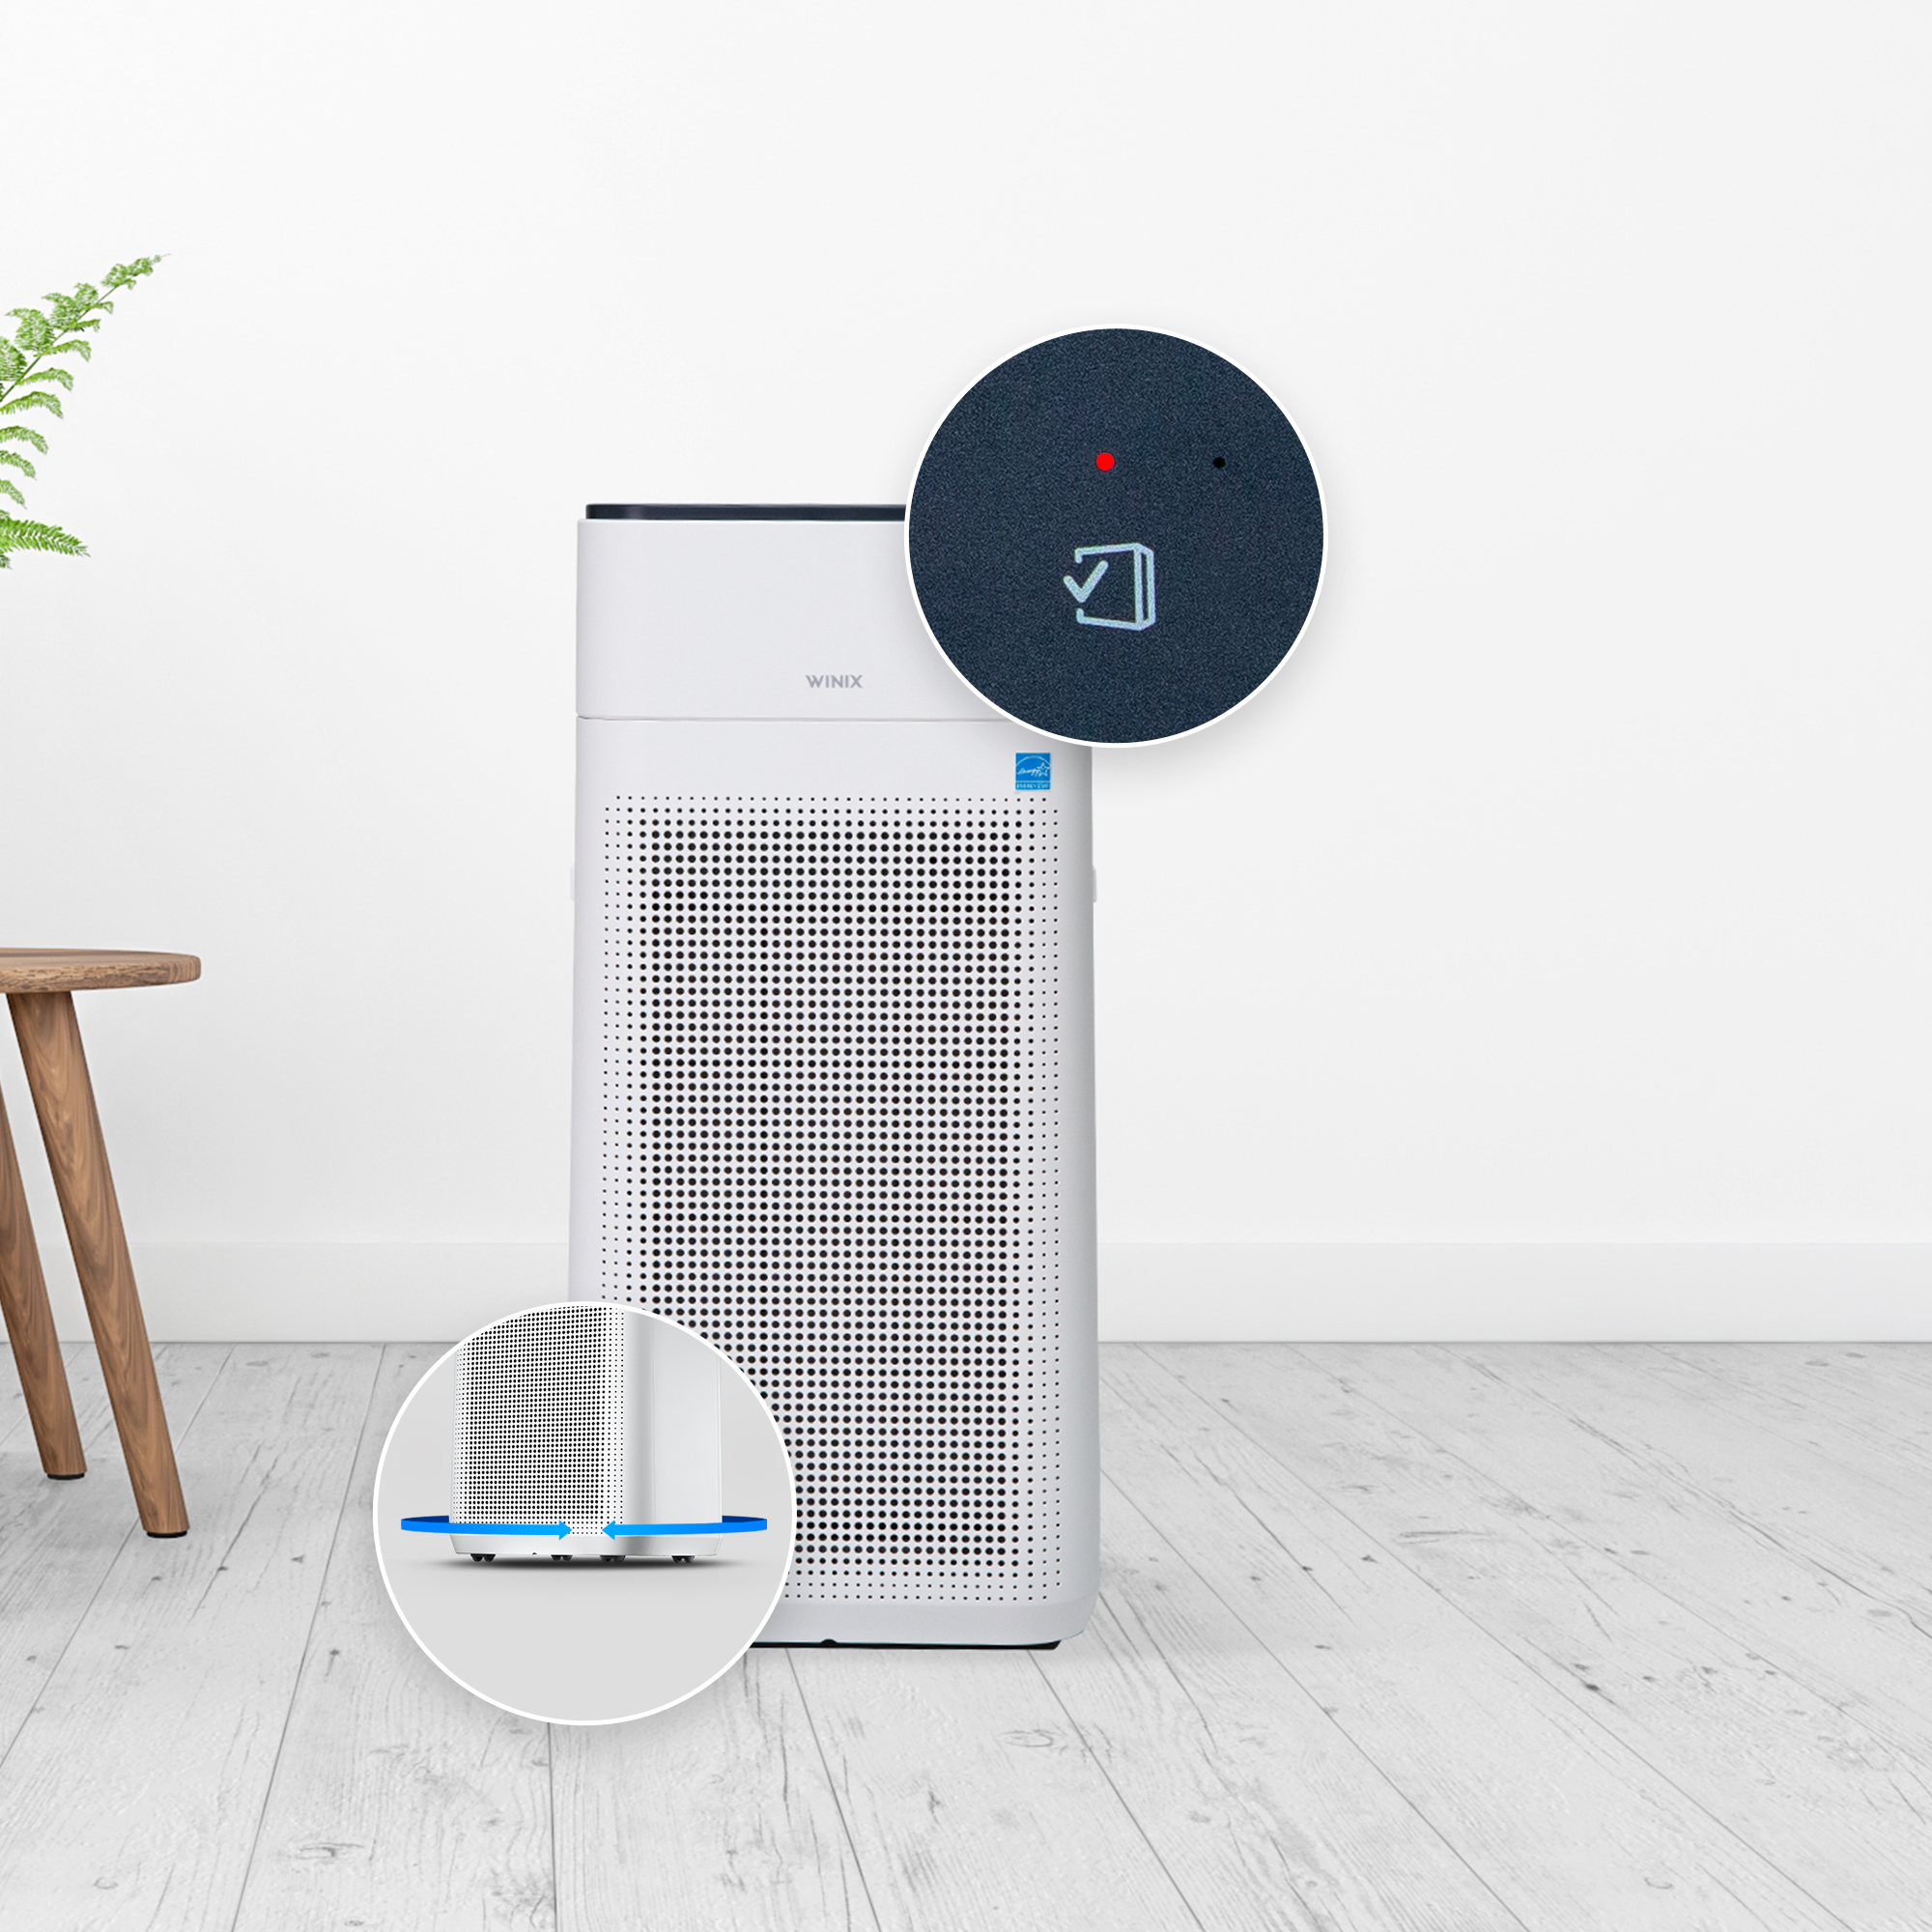 XLC Air Purifier Easy to Use with Check Filter Indicator and Caster Wheels